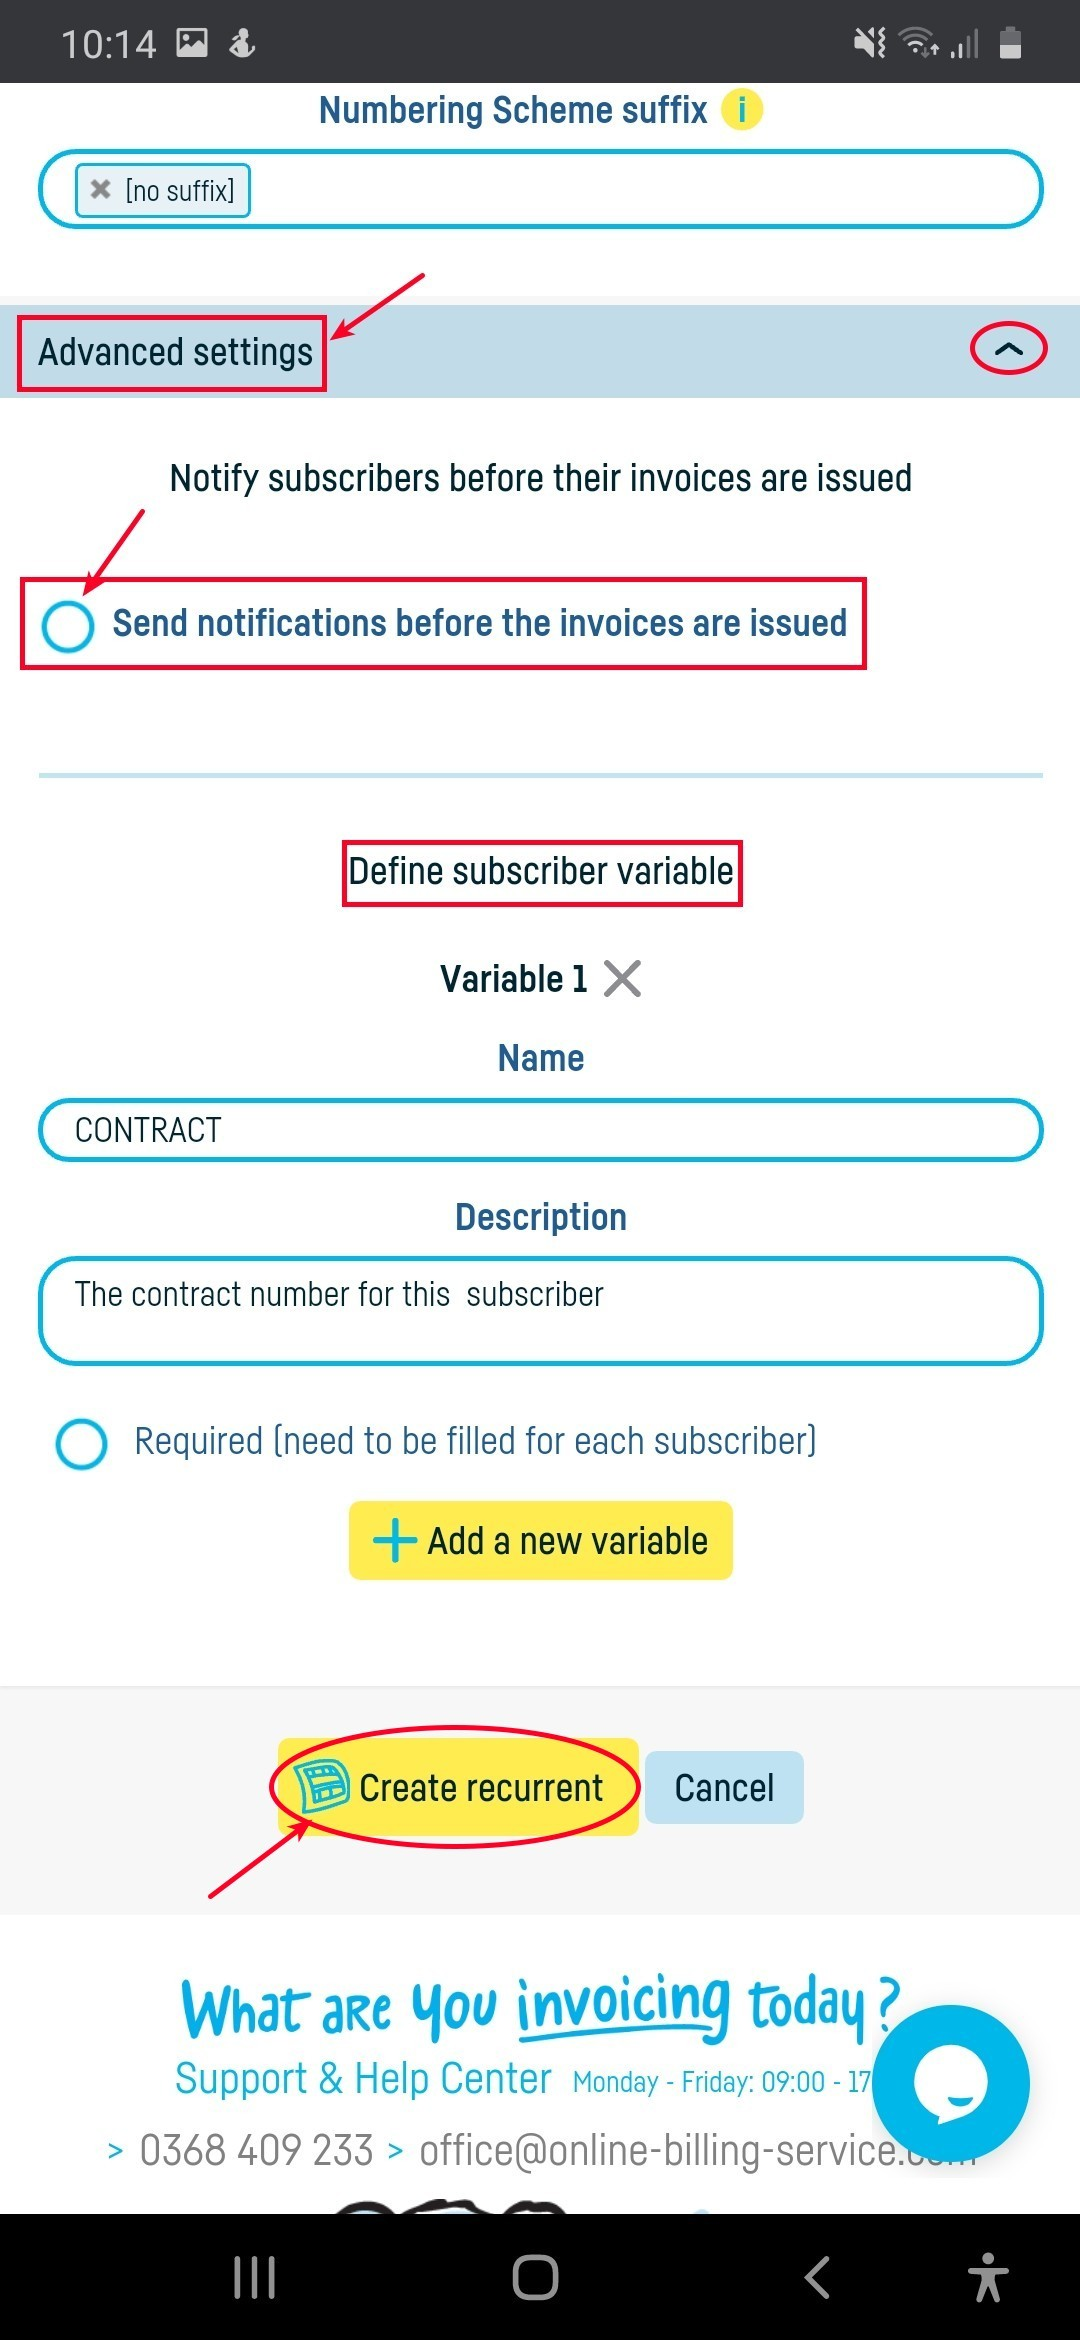 Notify subscribers before their invoices are issued - step 1